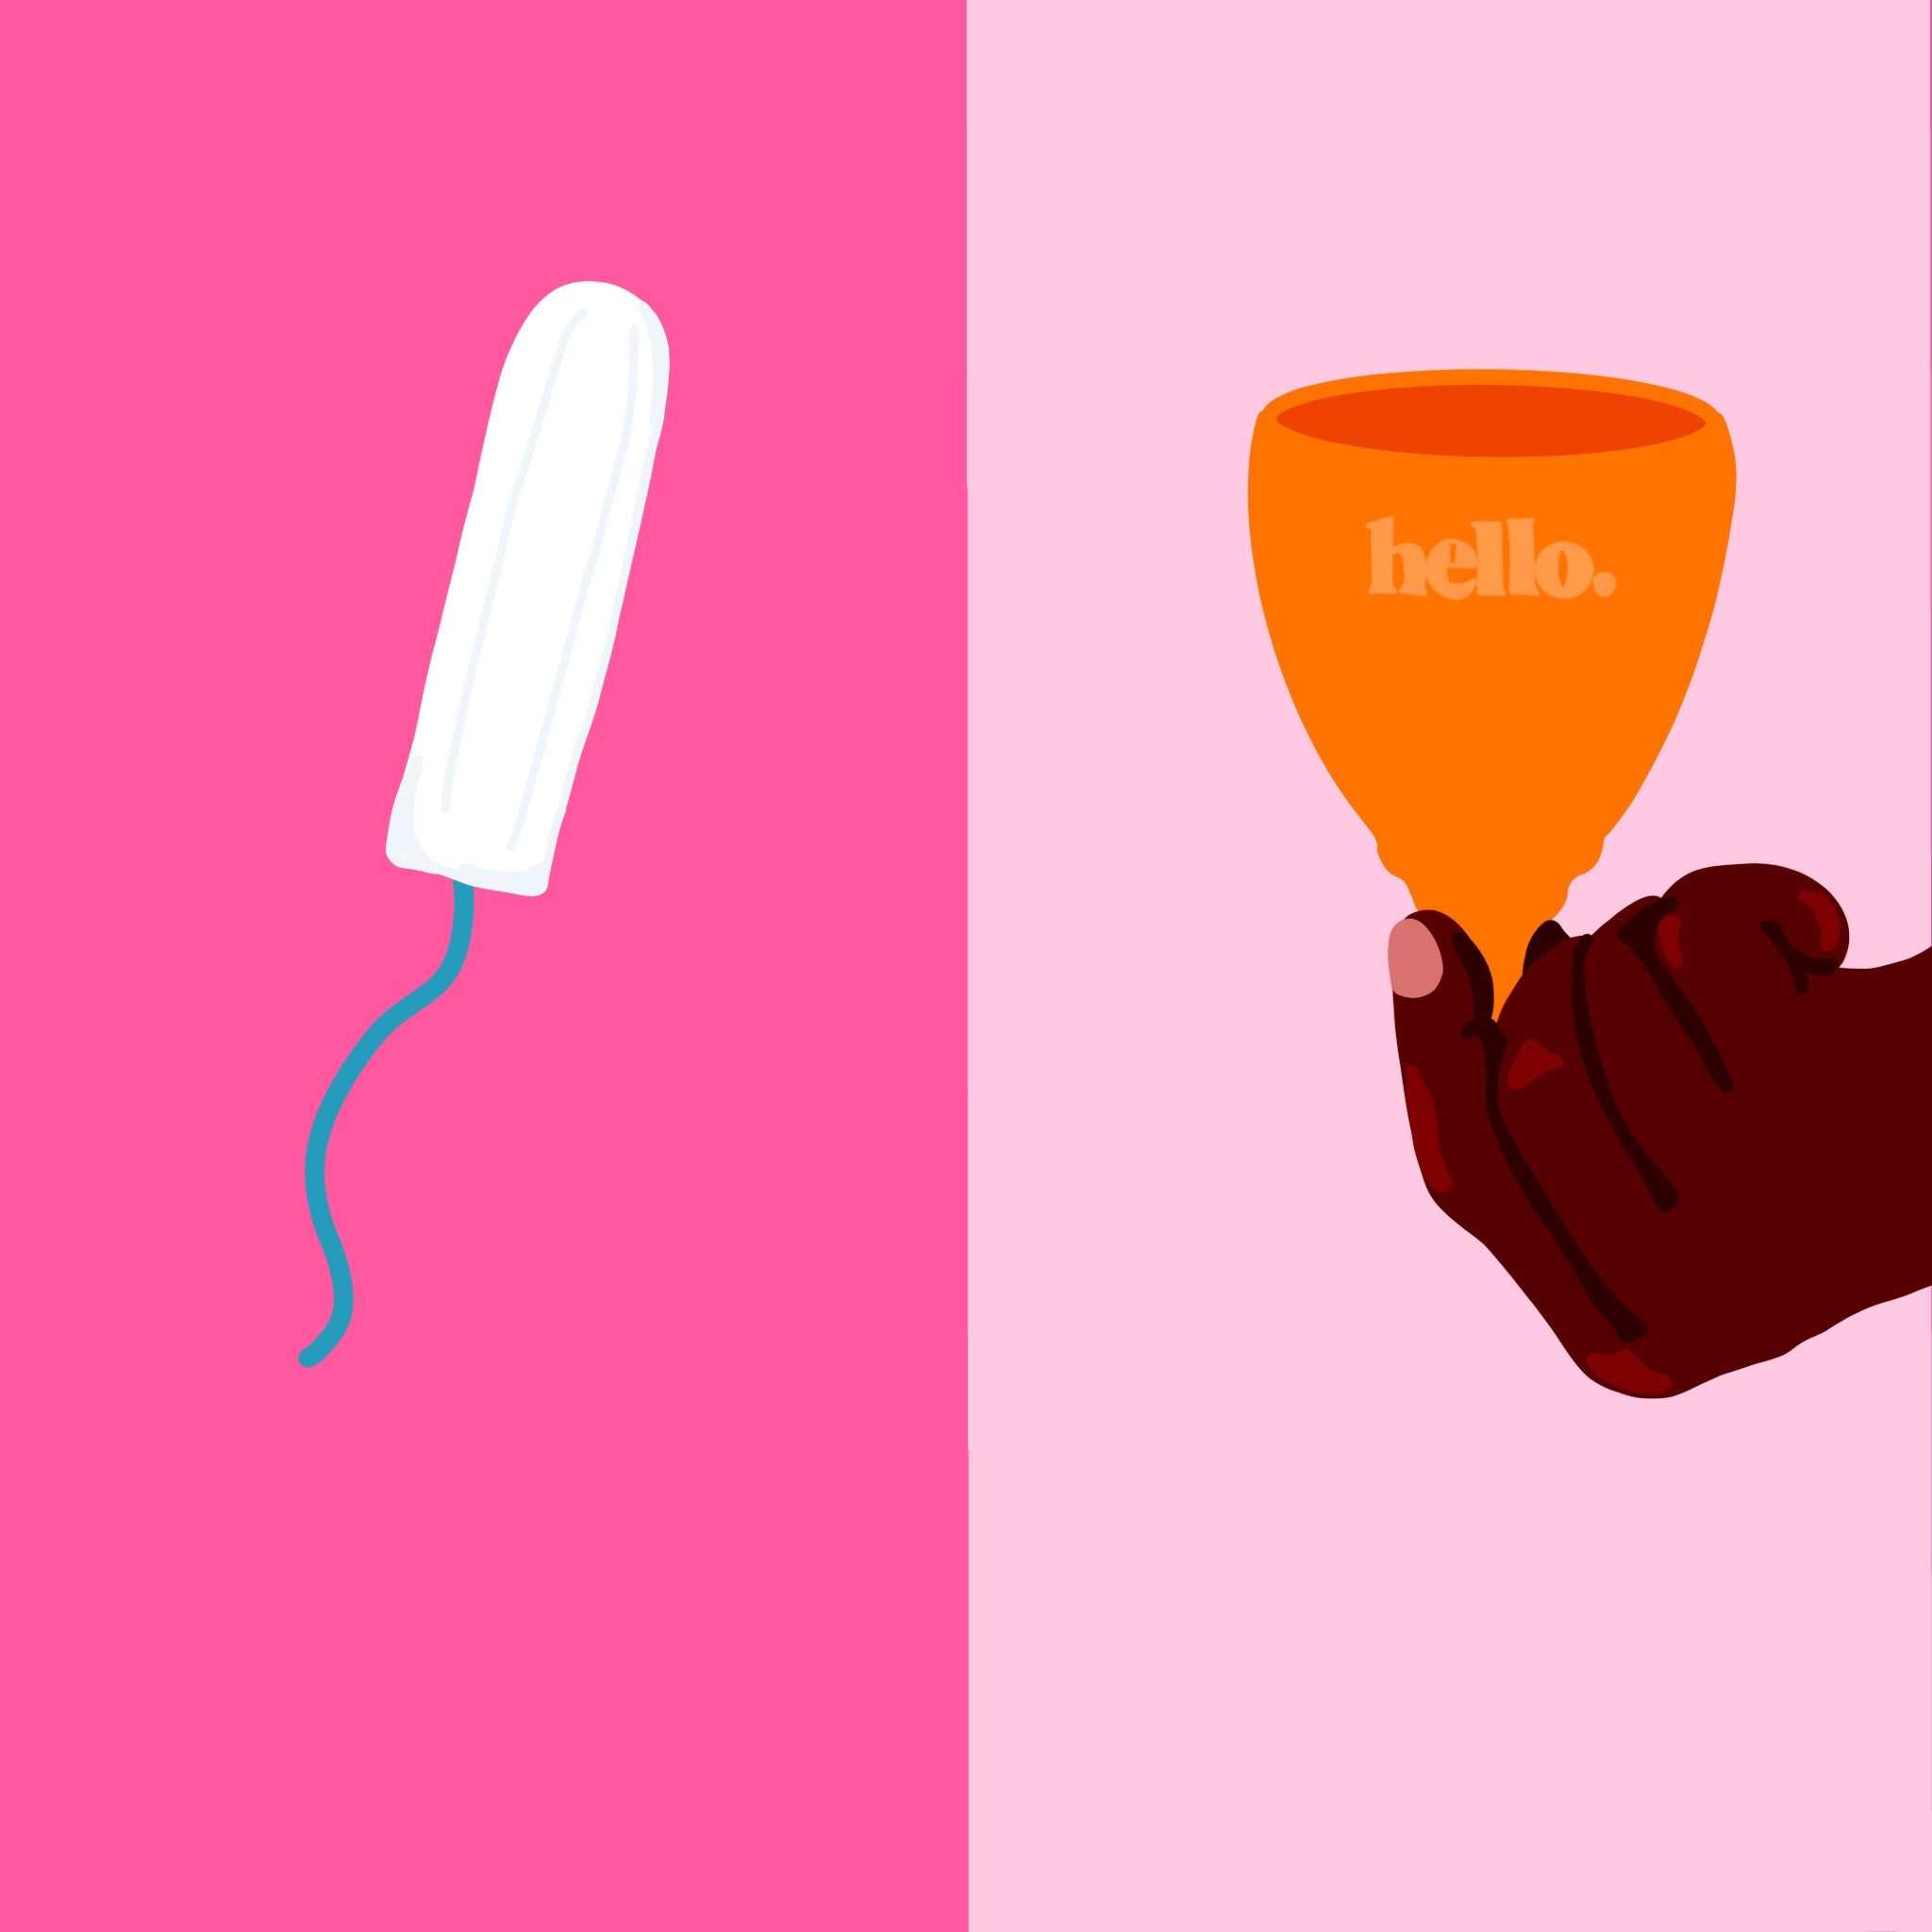 The Great Tampon Shortage Of 2022 - Now Is The Time To Use A Menstrual Cup